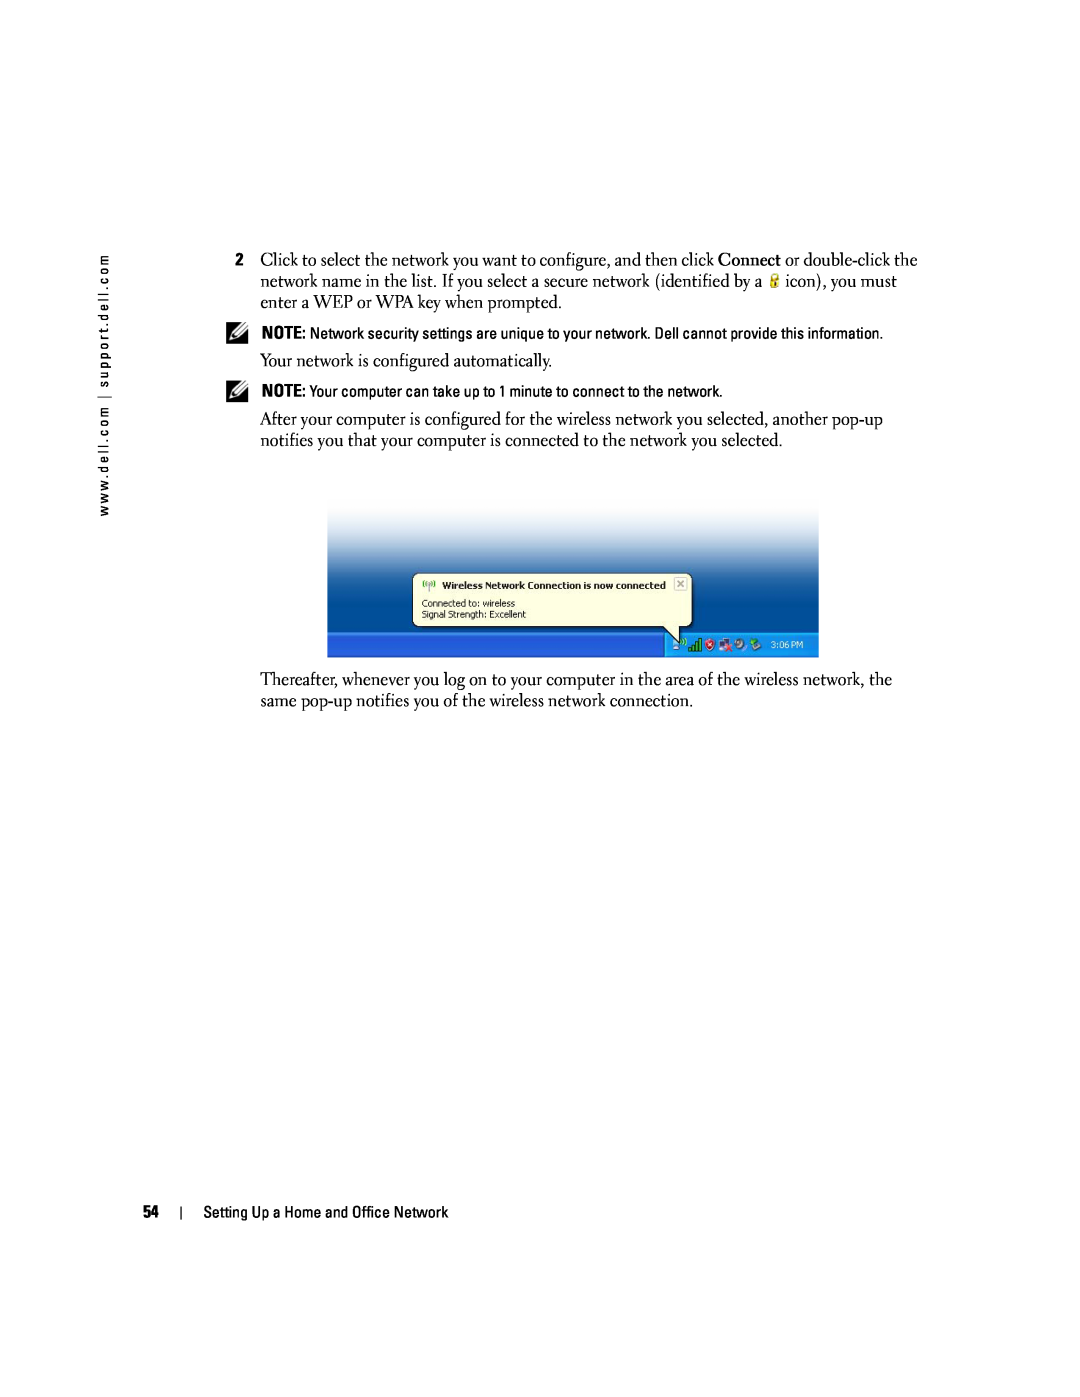 Dell 9300 owner manual Your network is configured automatically 